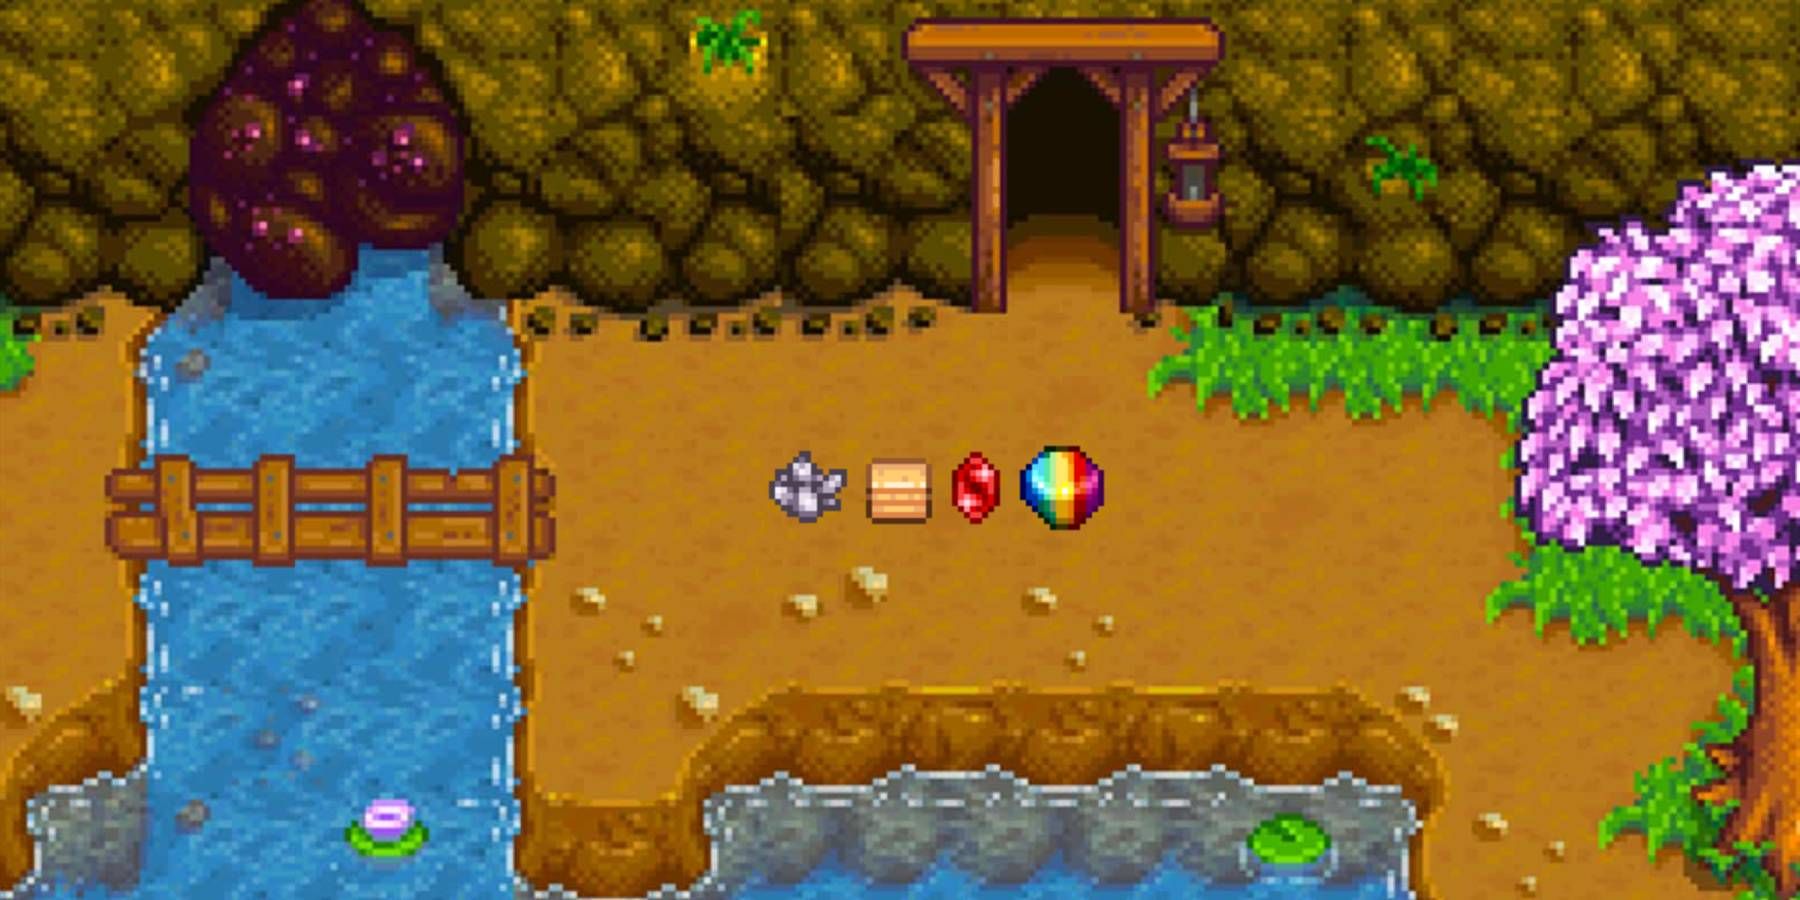 Quartz, Sandstone, Ruby, and a Prismatic Shard in front of the mine in Stardew Valley